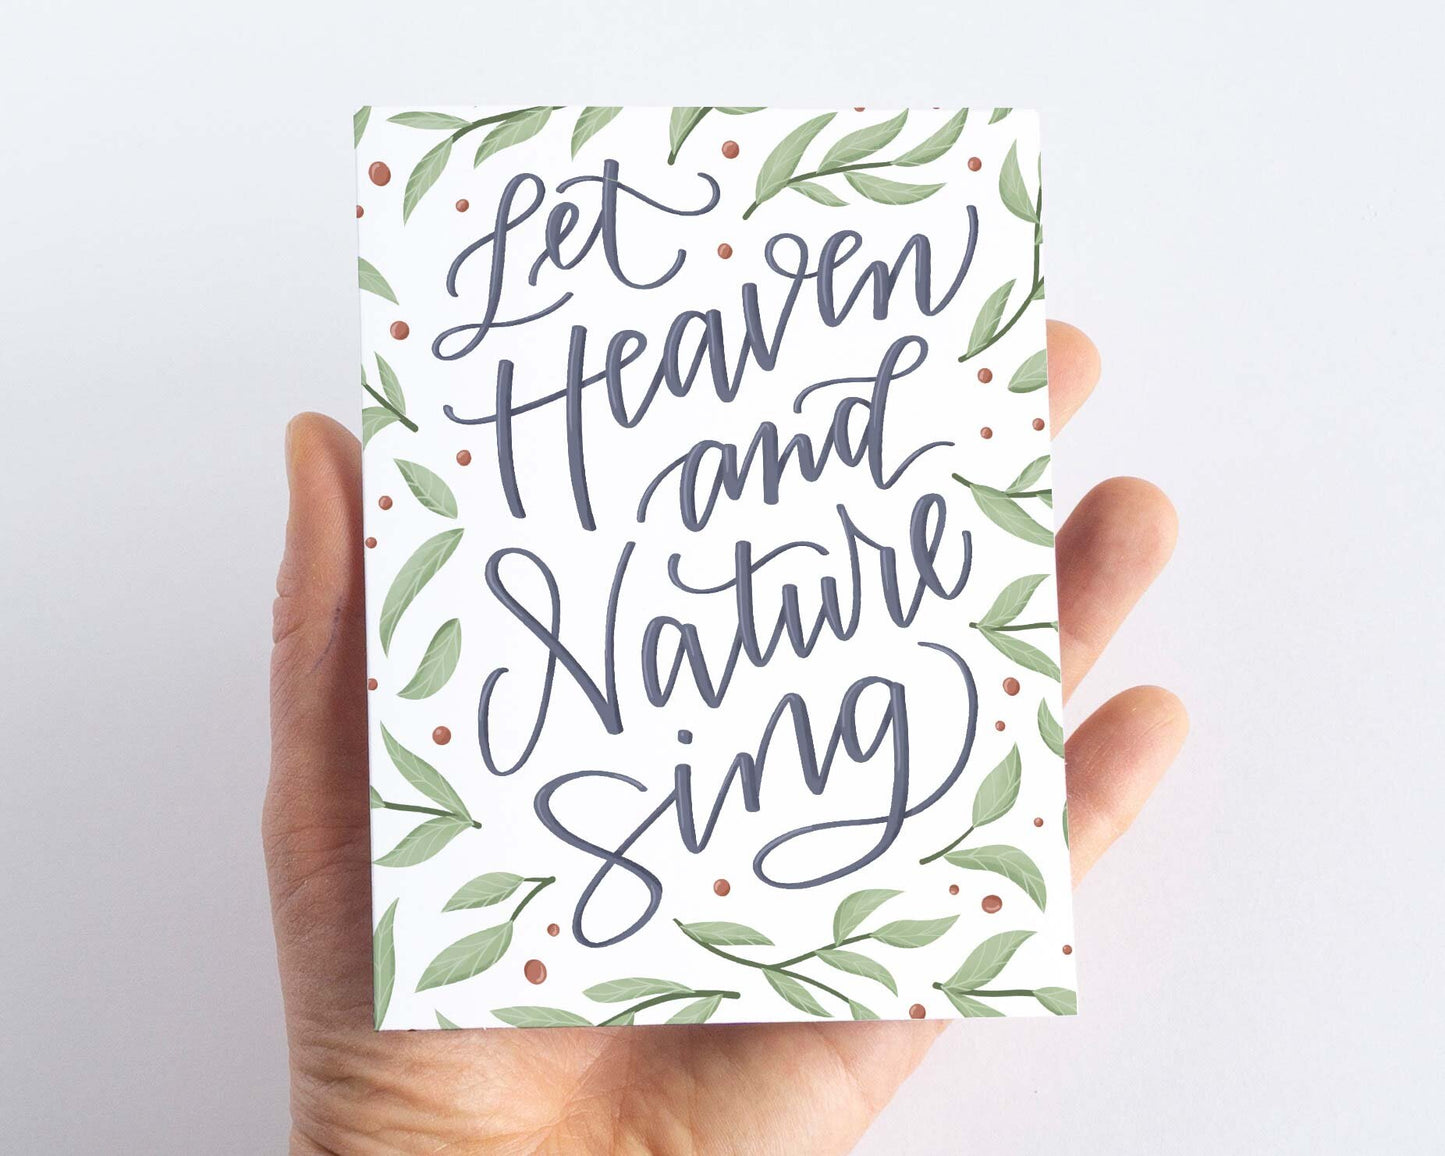 Let Heaven and Nature Sing Christmas Card